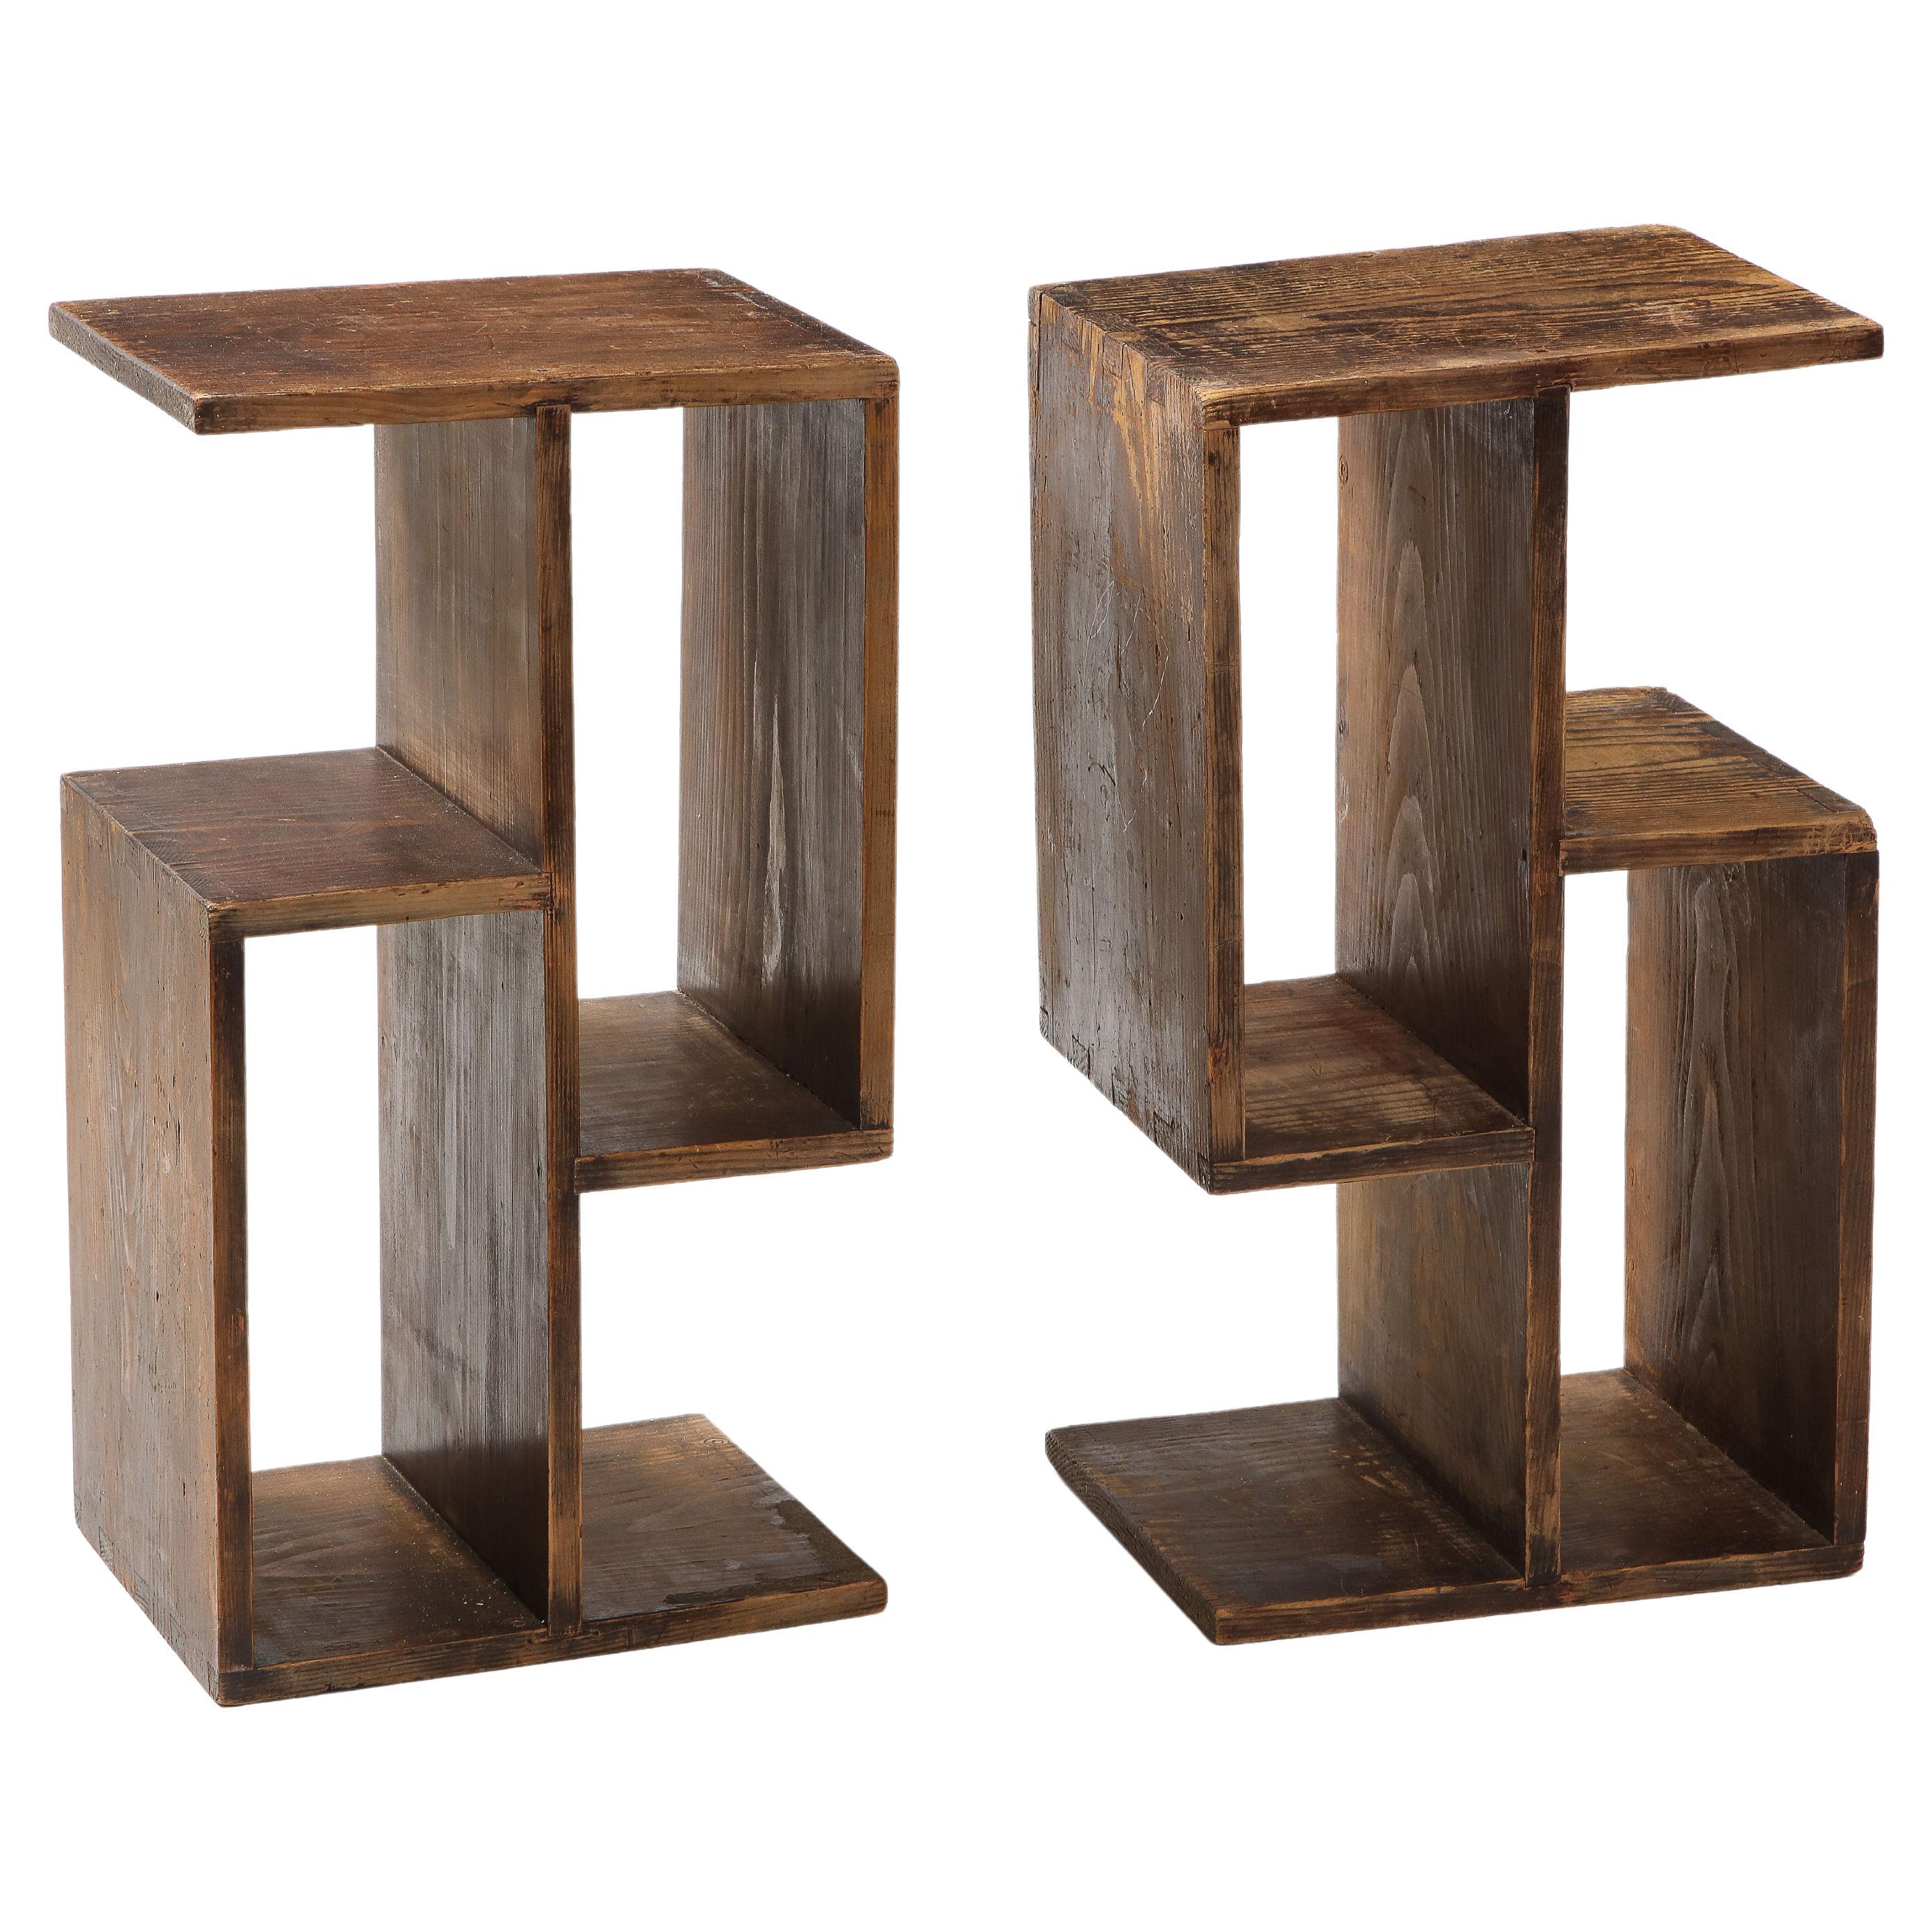 Pair of solid pine end tables from the reconstruction period, assembled with Interesting joinery, the tables can be used vertically or horizontally.